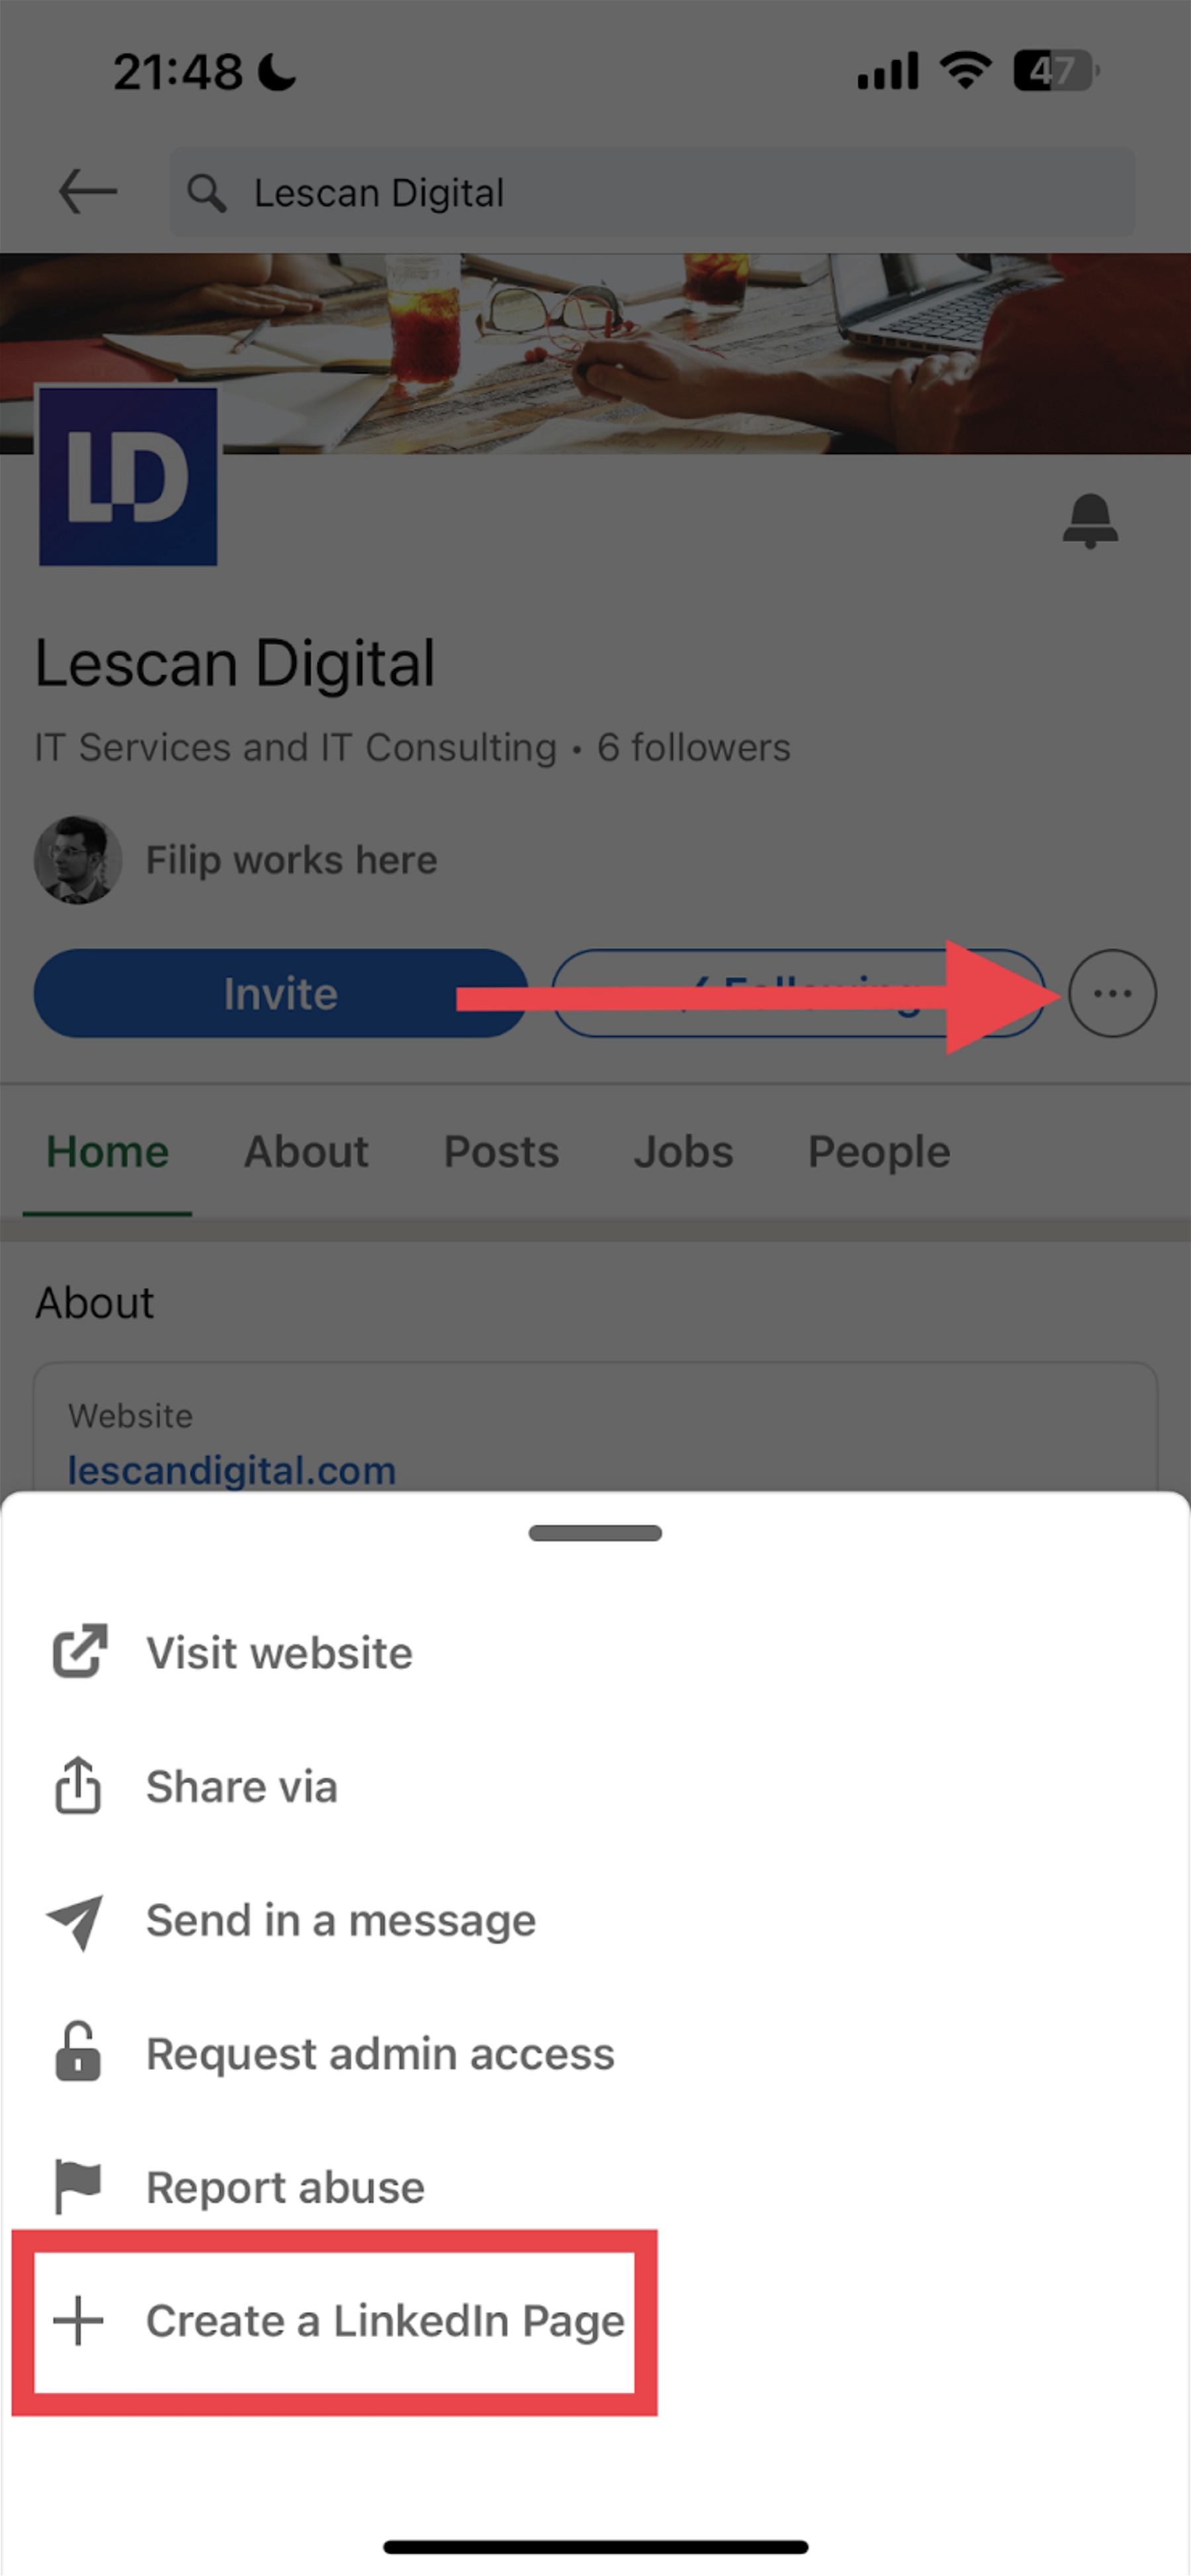 How to Create a Company Page on LinkedIn (Step-by-Step Guide)